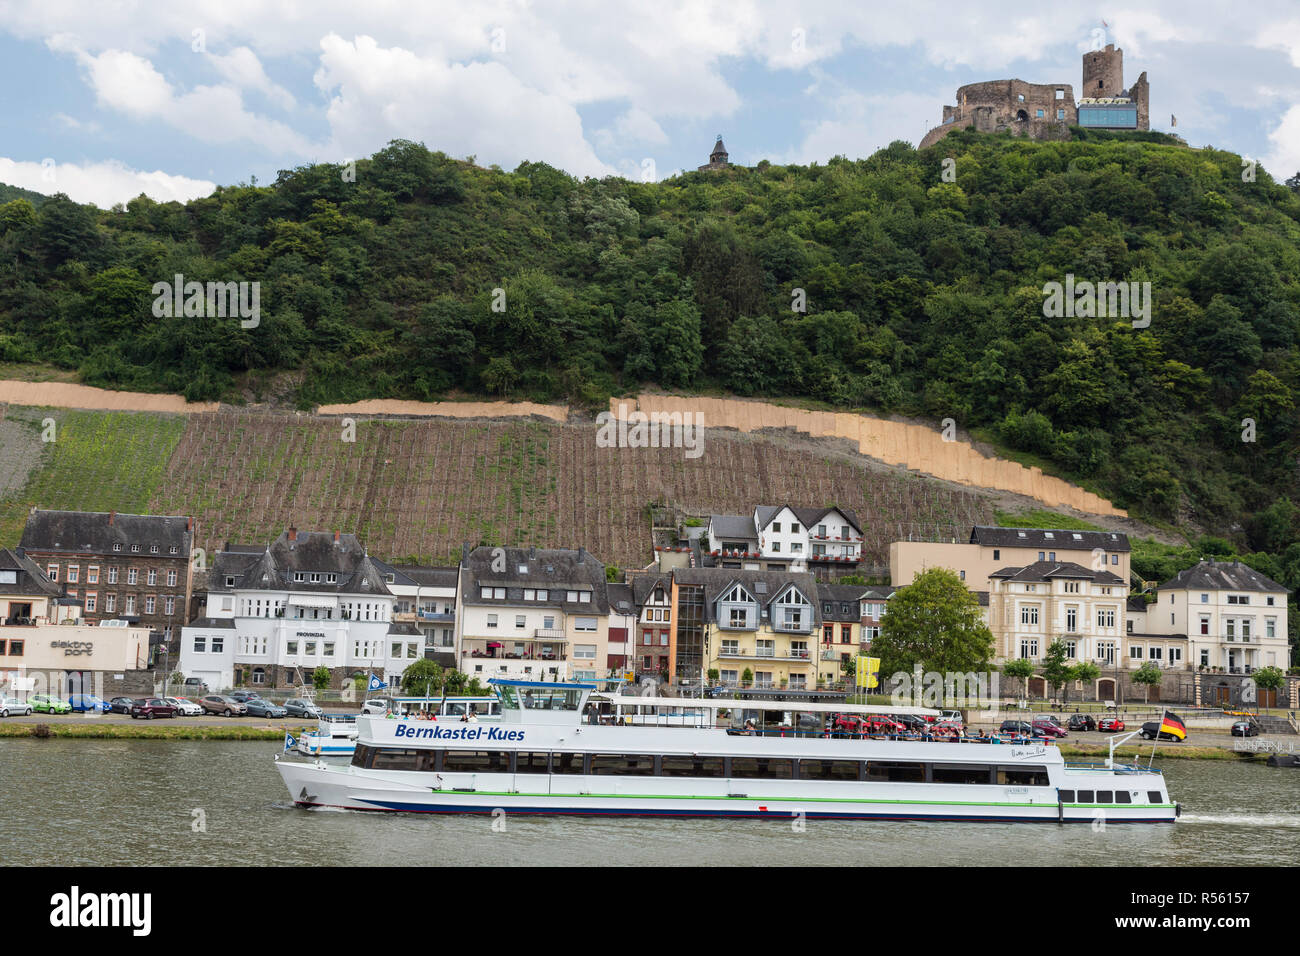 Bernkastel, Germany.  A Tourist River Cruise Boat on the Moselle.  Landshut Castle Ruins on Hilltop. Stock Photo